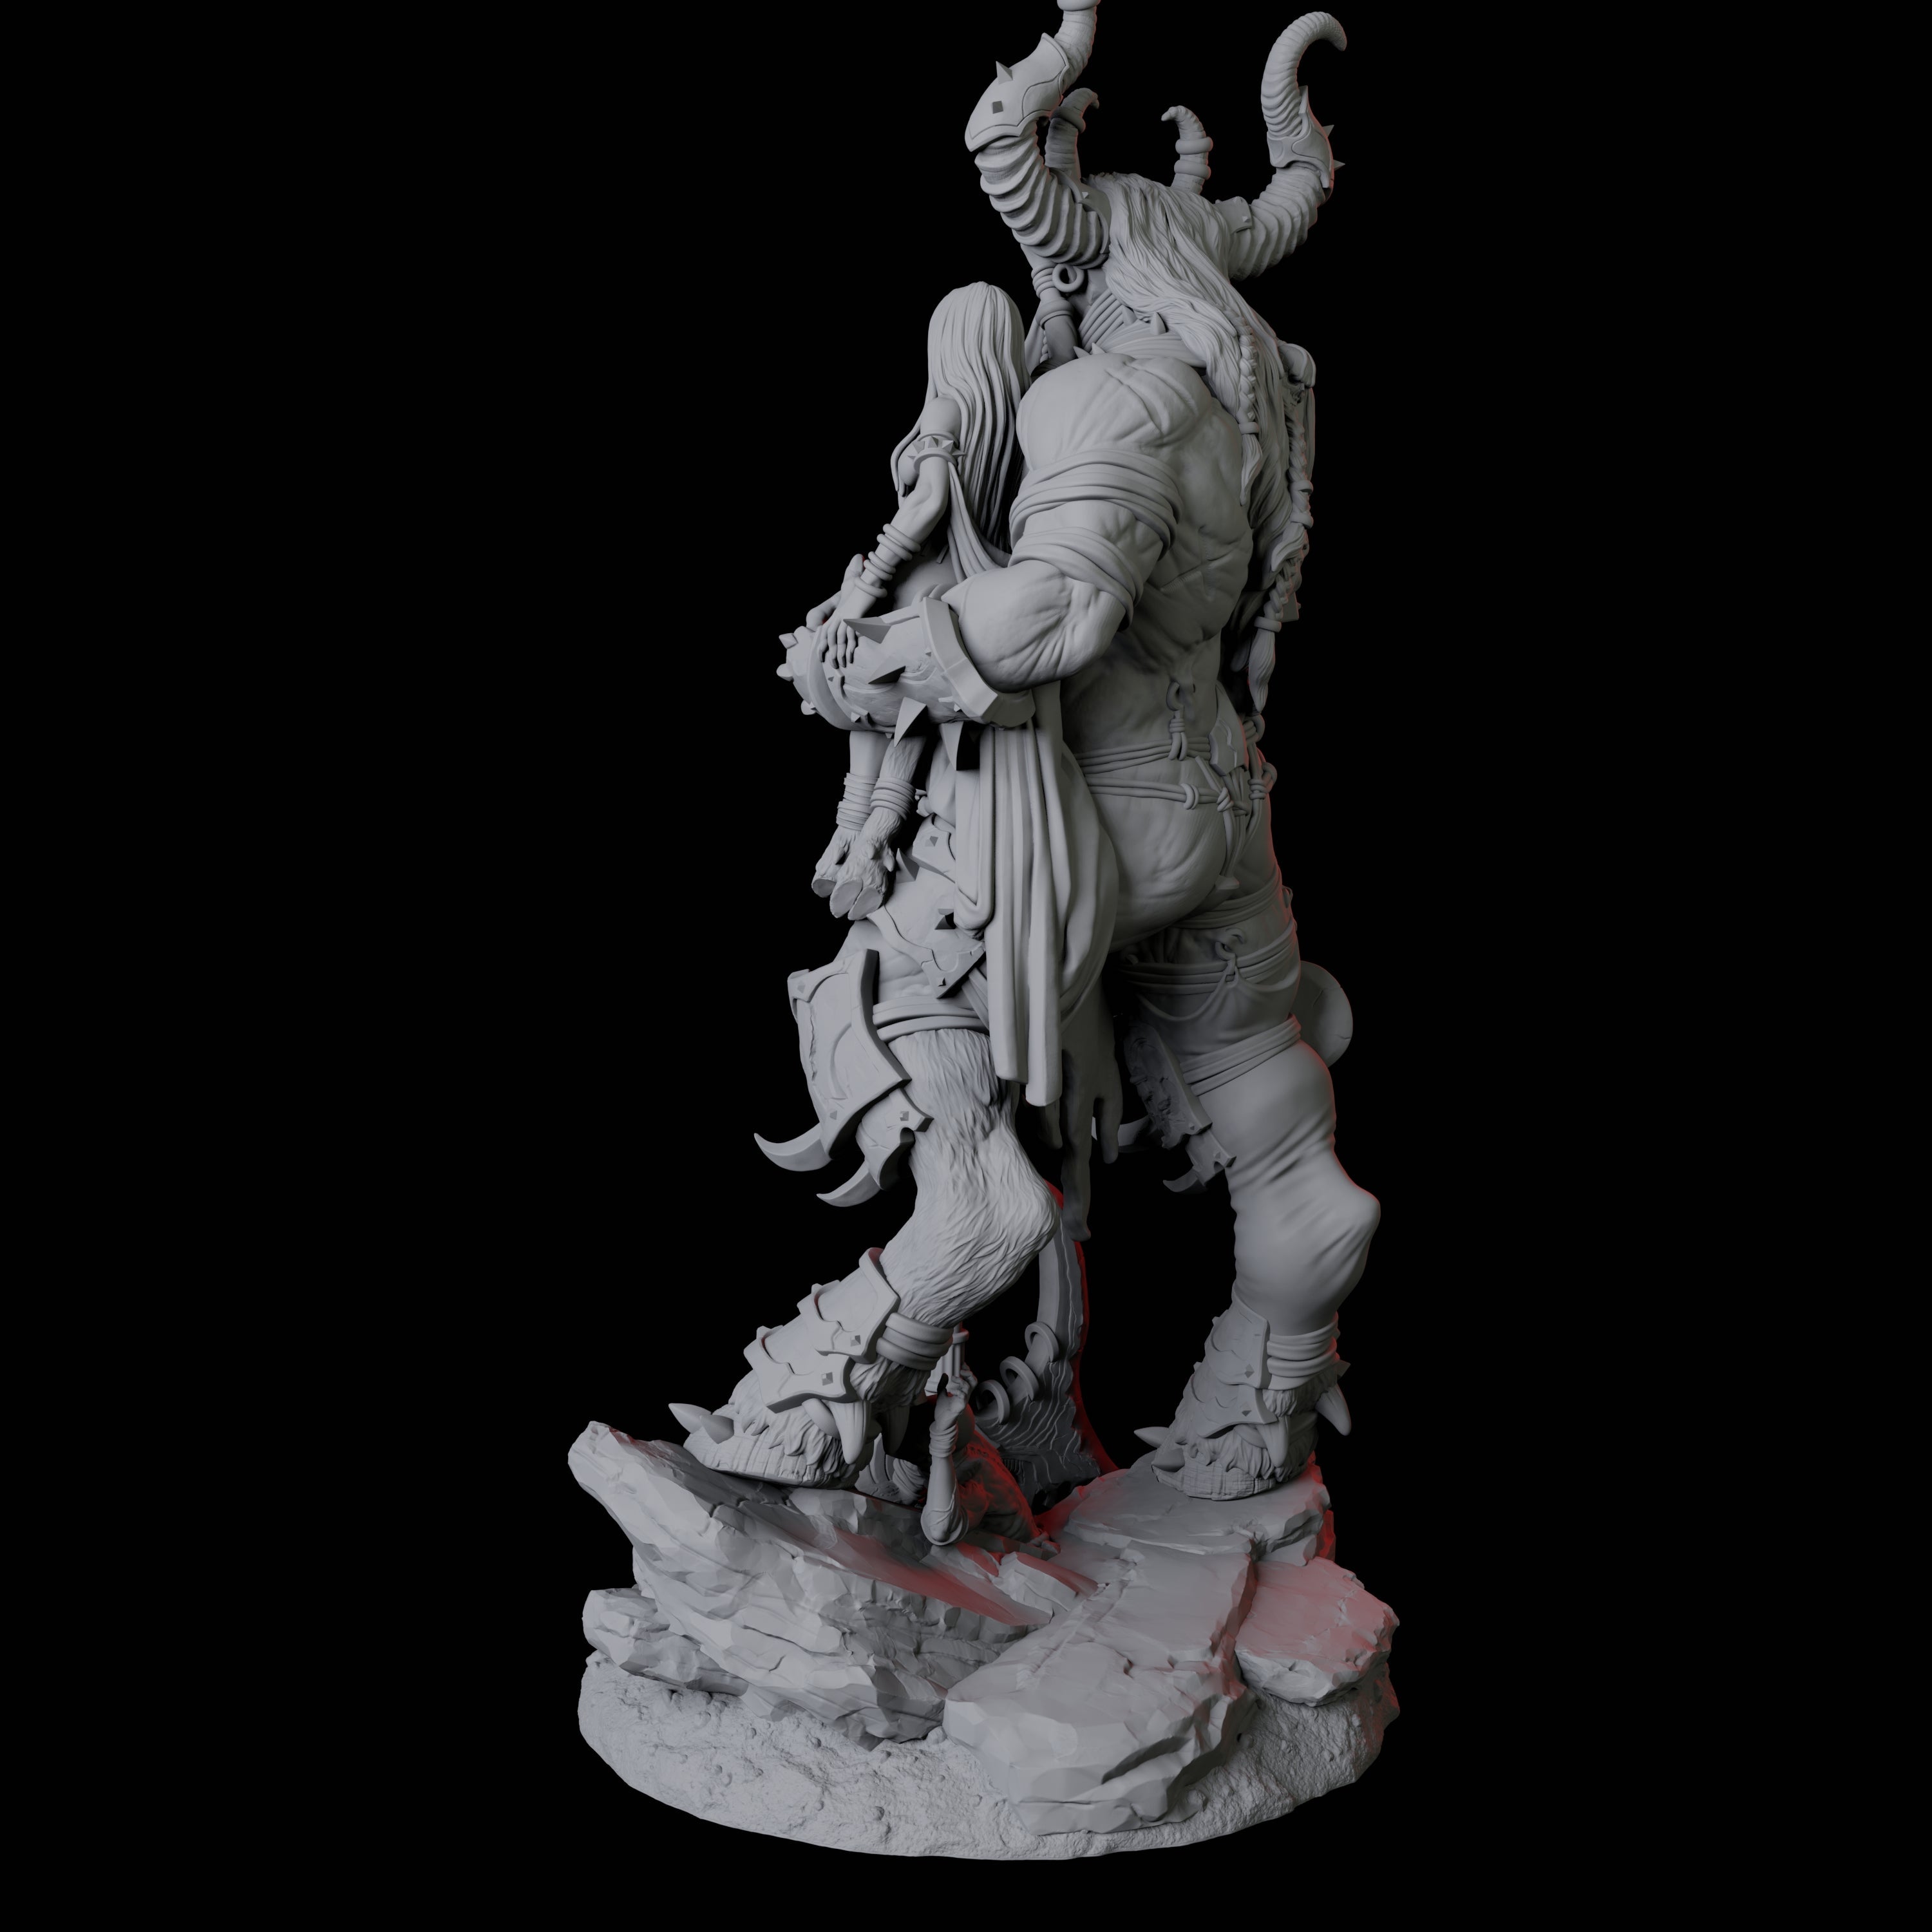 Seduced Bearded Devil Champion A Miniature for Dungeons and Dragons, Pathfinder or other TTRPGs